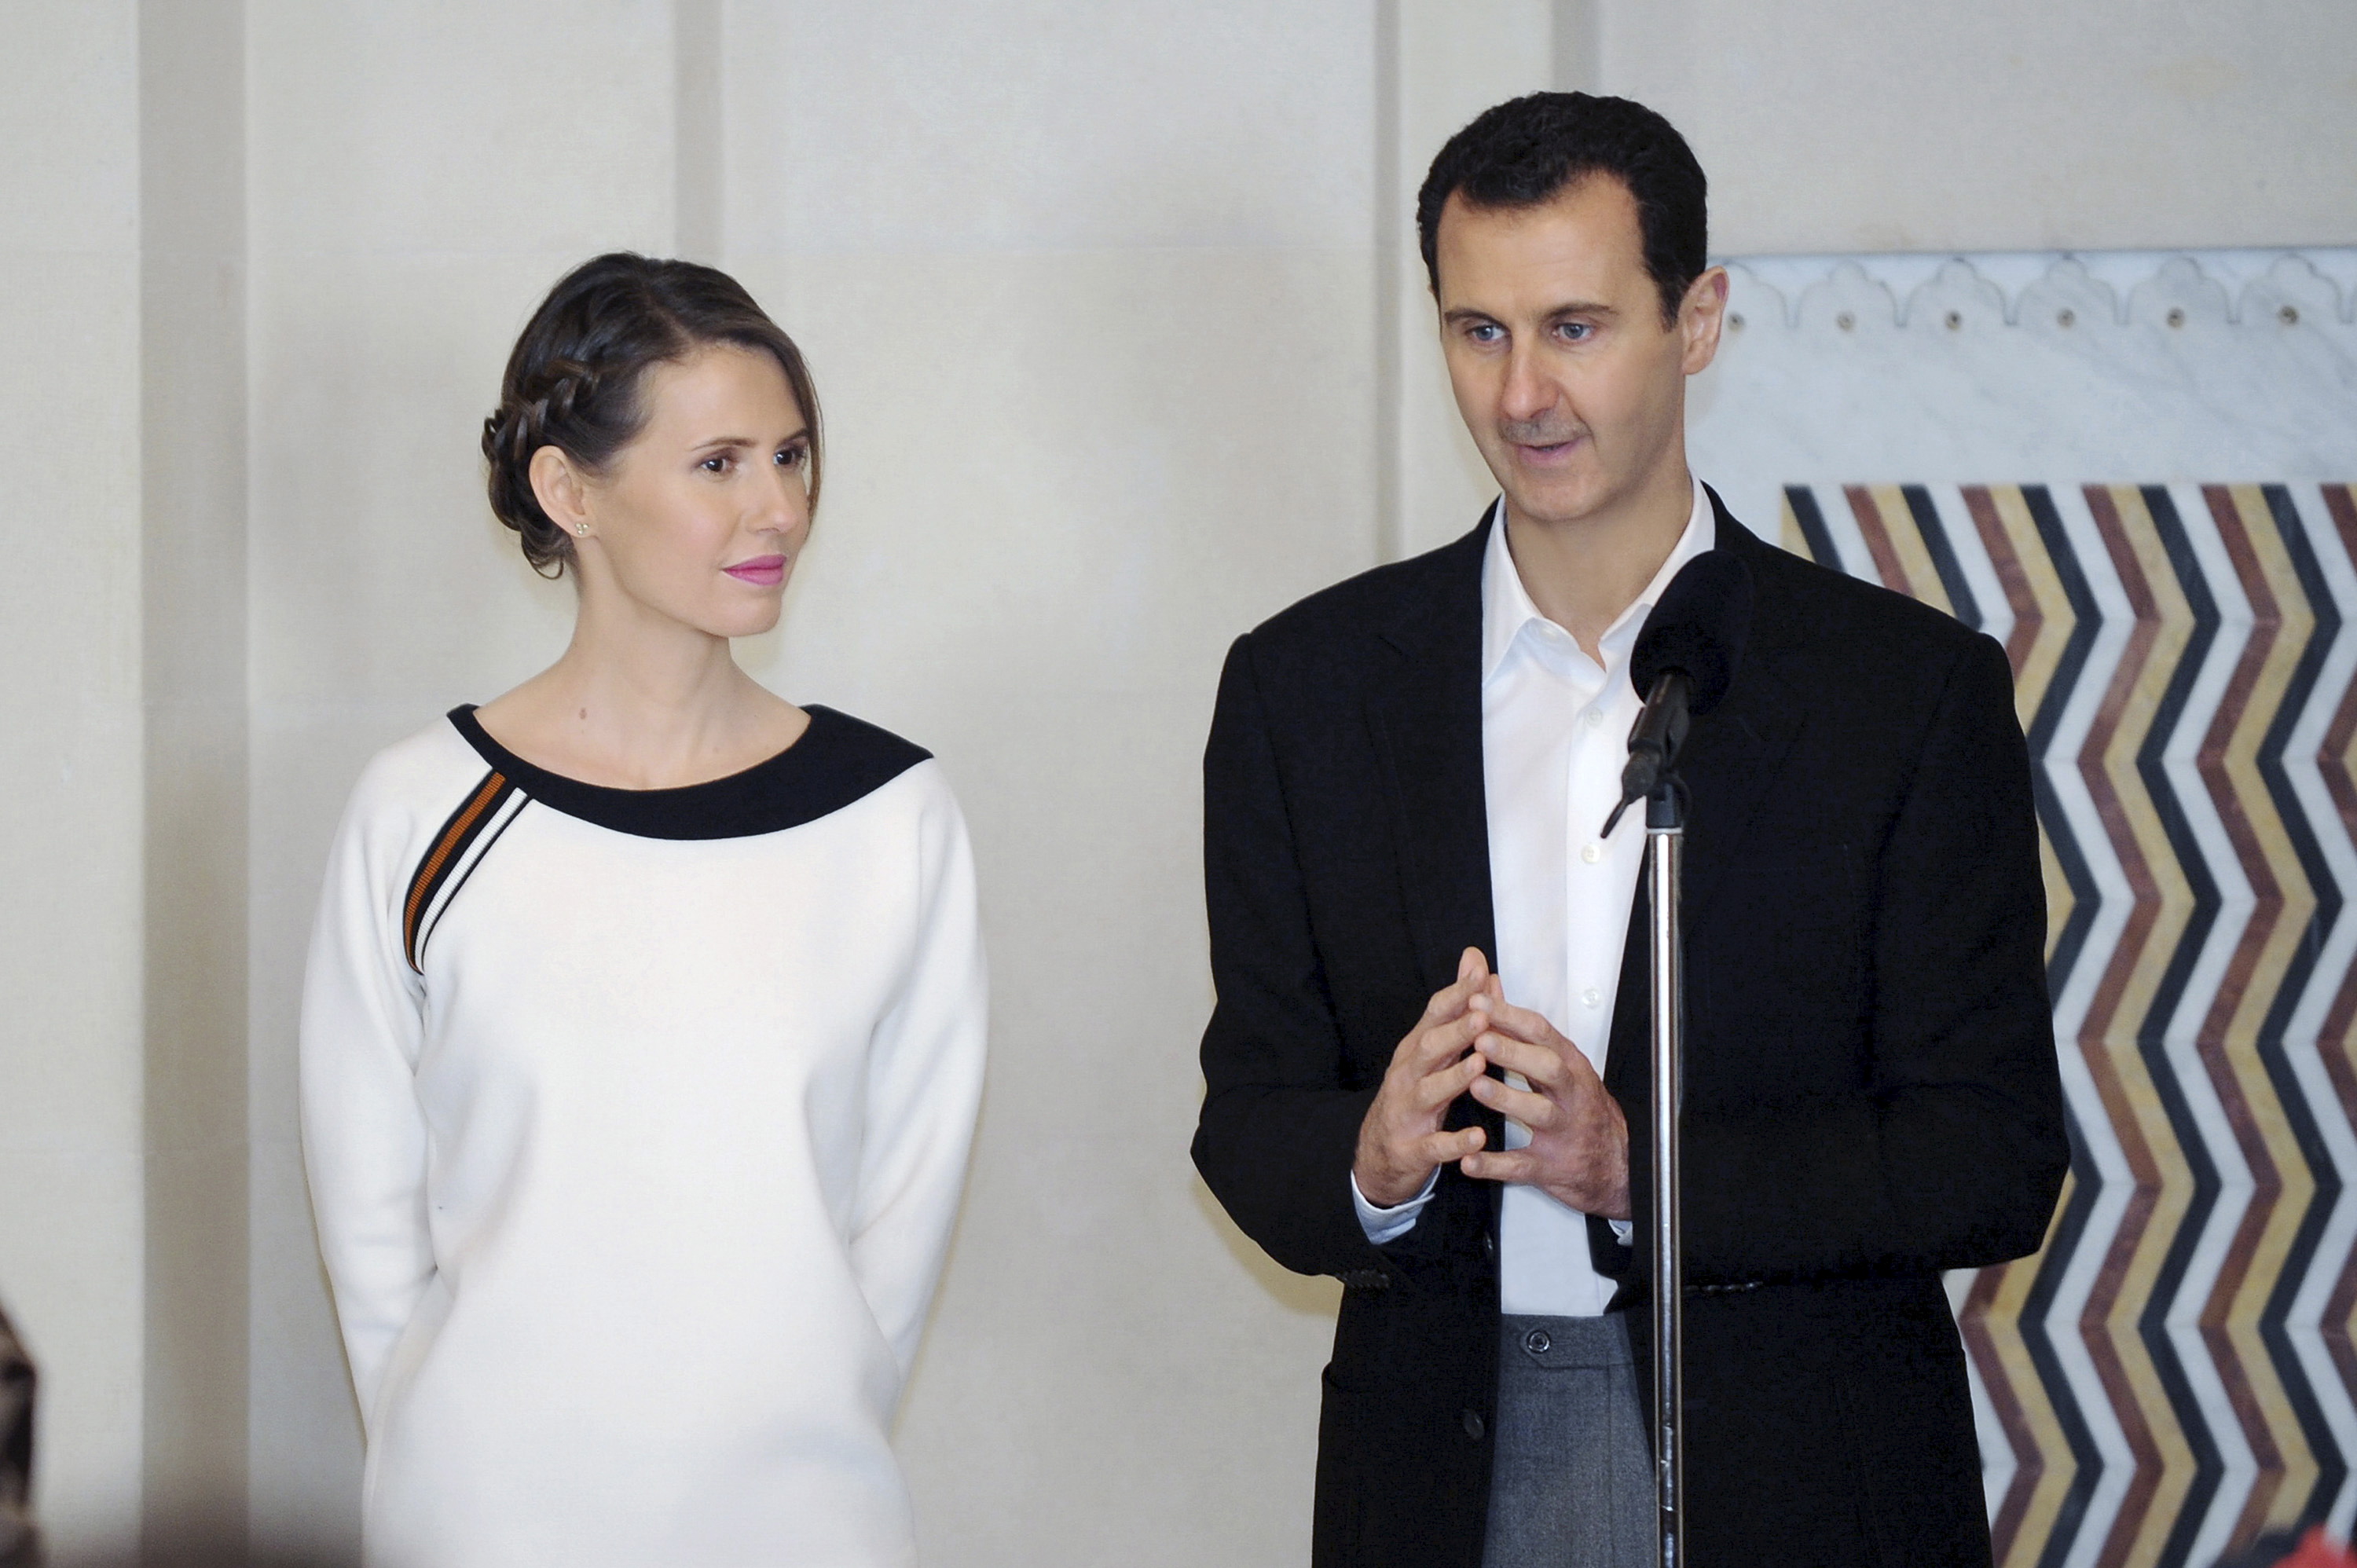 Syria's President Bashar Assad stands next to his wife Asma as he addresses injured soldiers and their mothers during a celebration marking Syrian Mother's Day in Damascus, in this handout picture provided by SANA on March 21, 2016 (Sana—Reuters)